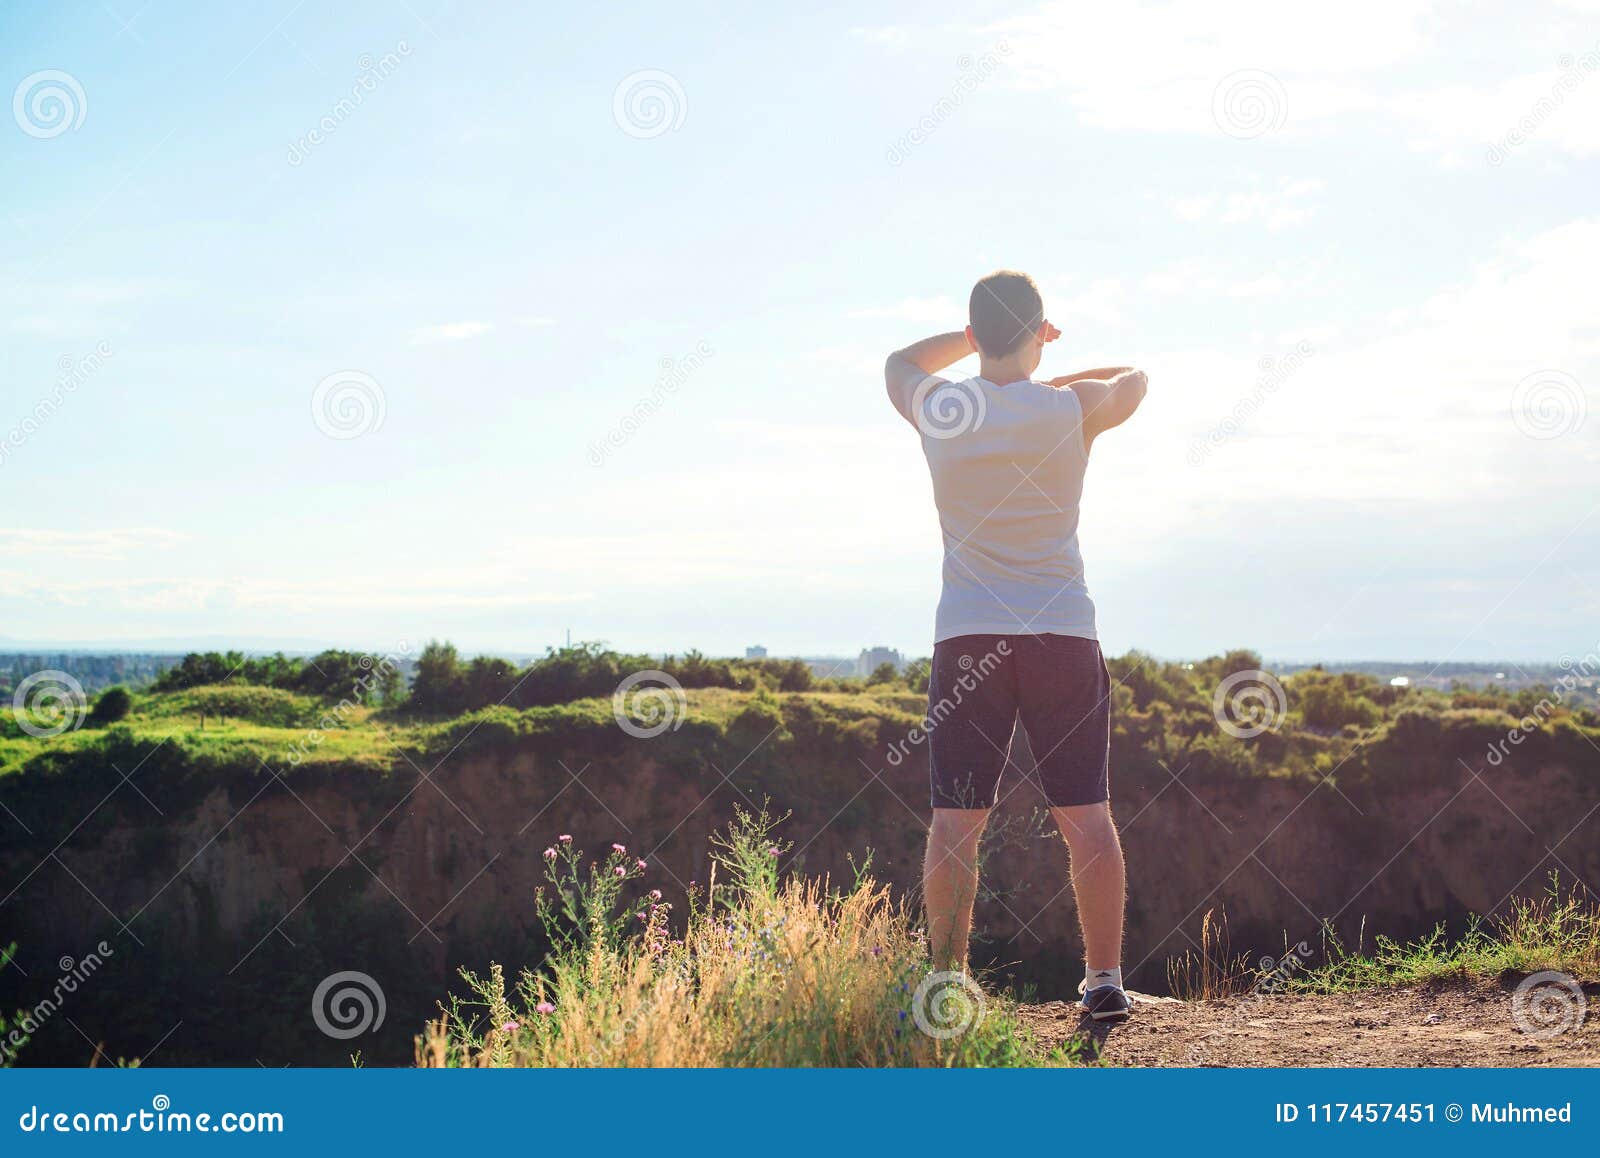 Man Look Far Away on Nature. Image - Image concentration, alone: 117457451